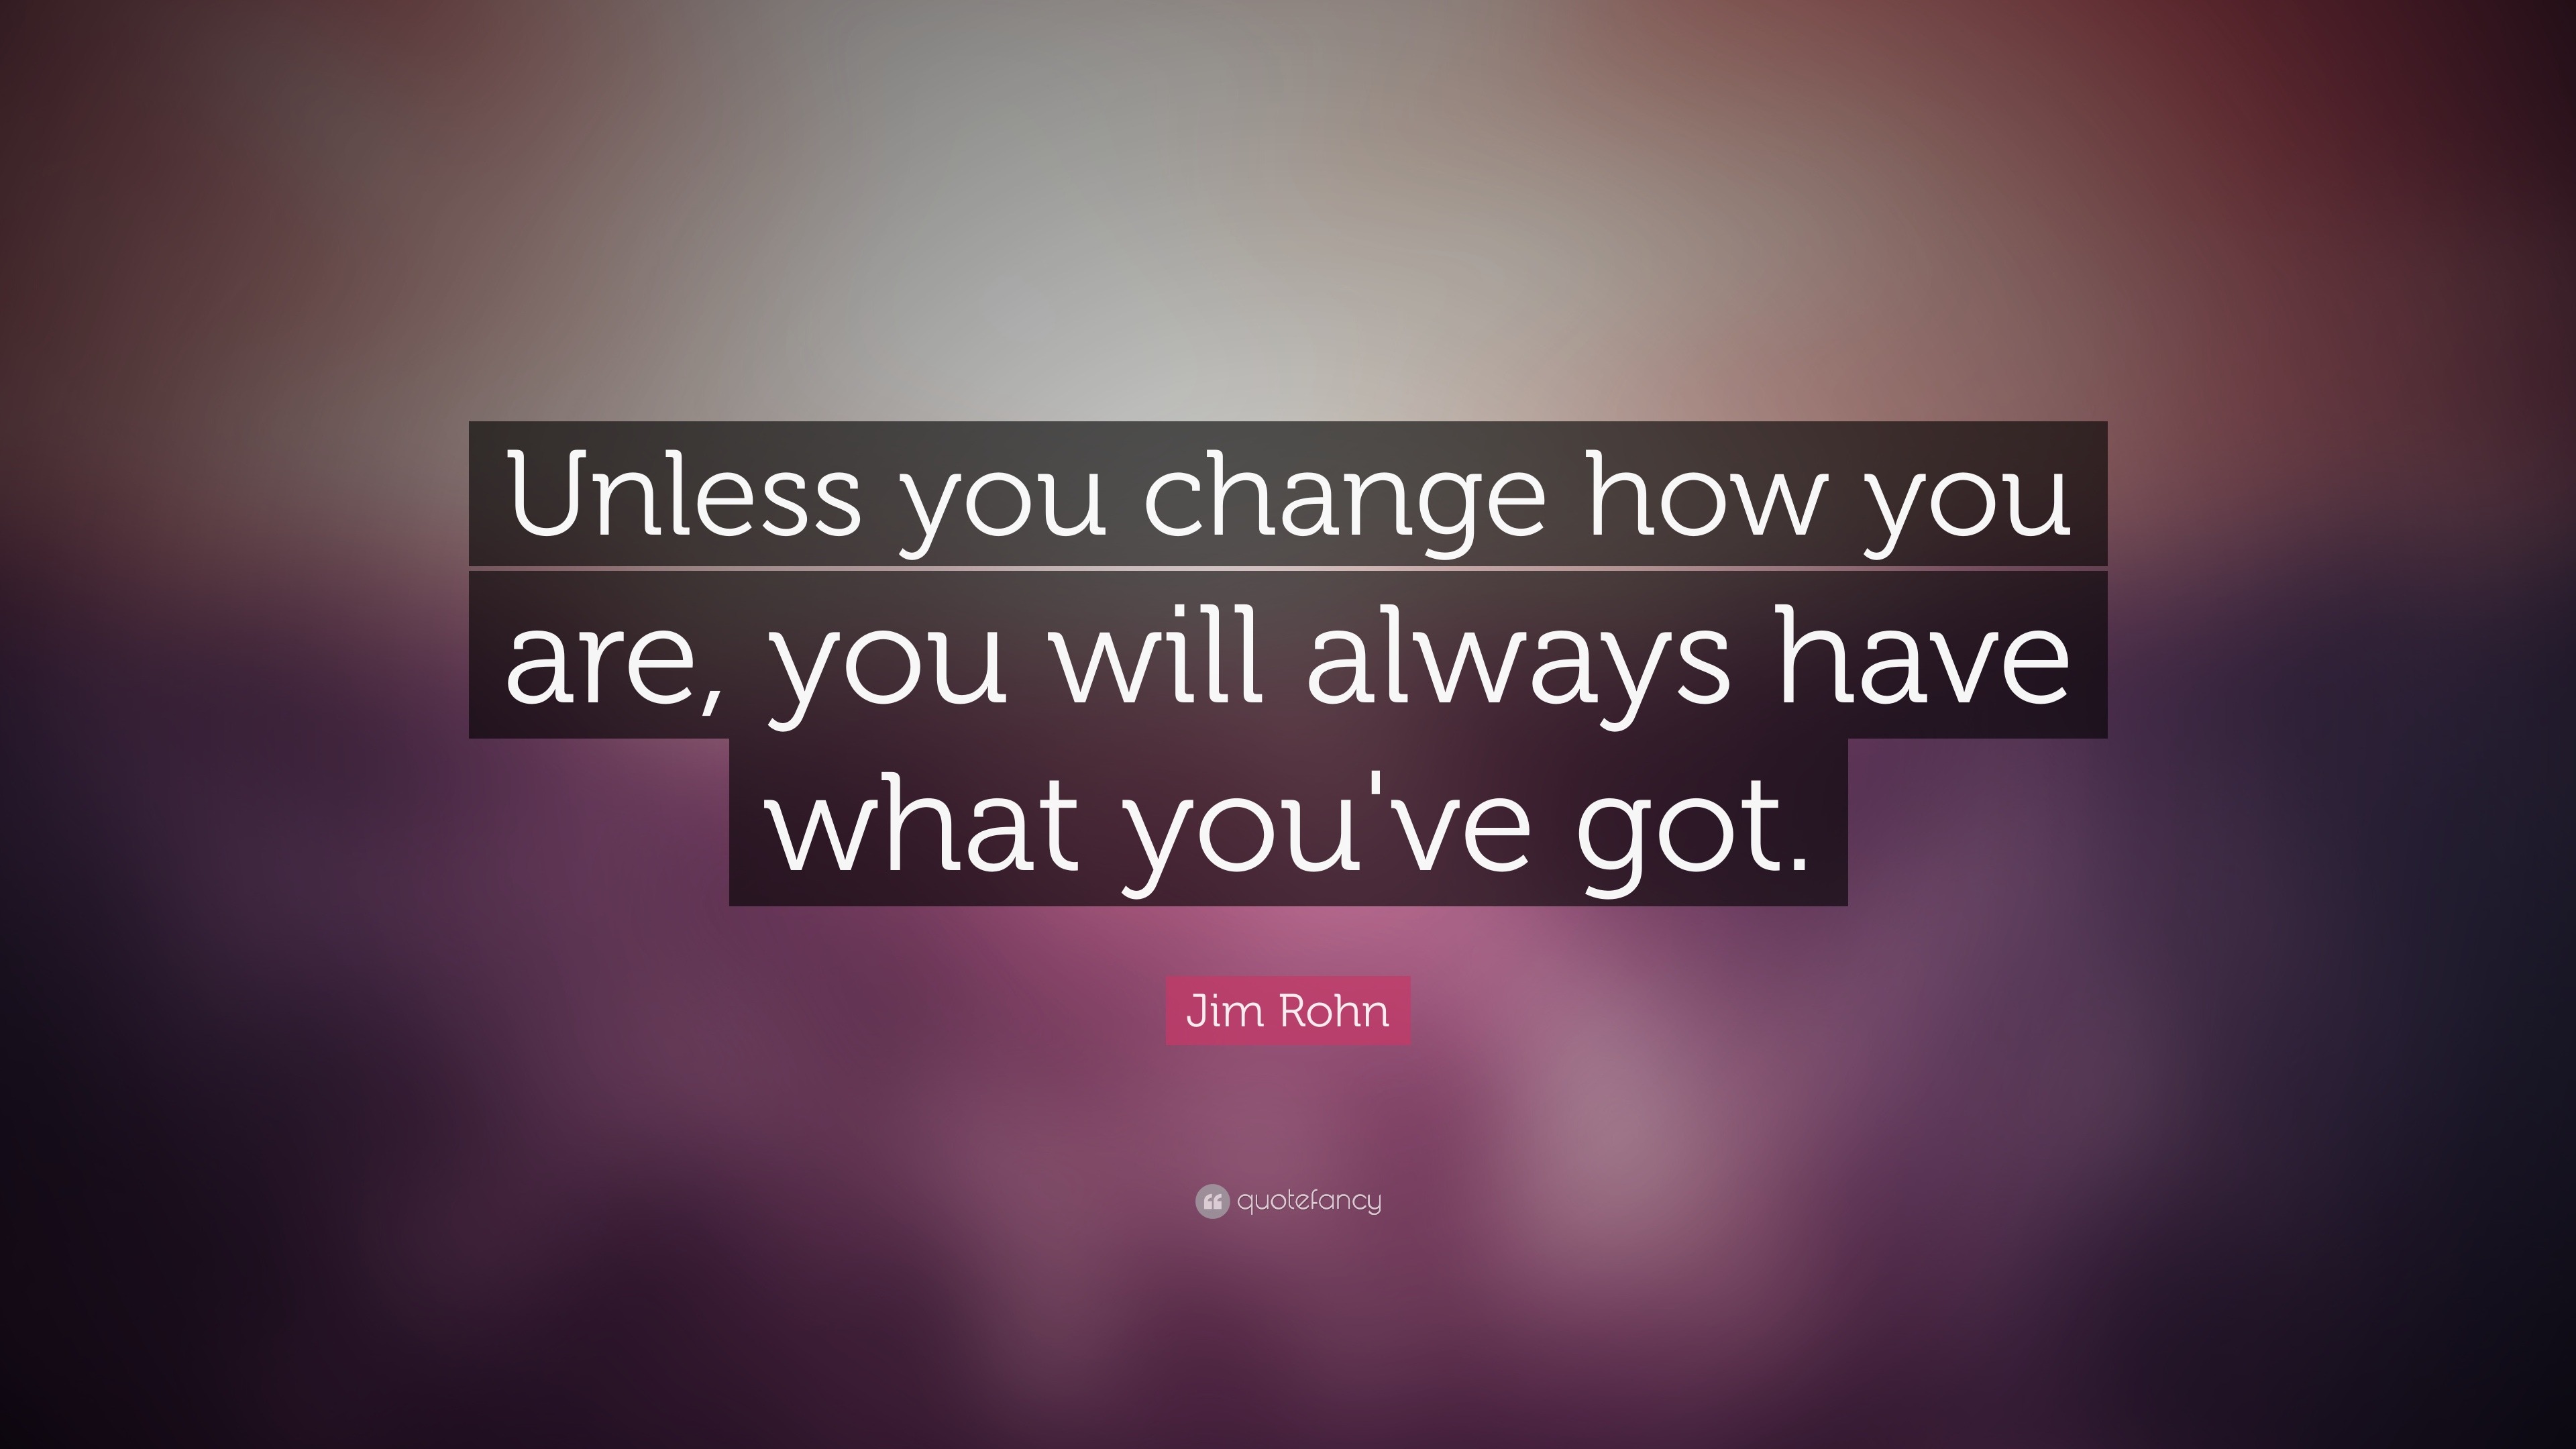 Jim Rohn Quote: “Unless you change how you are, you will always have ...